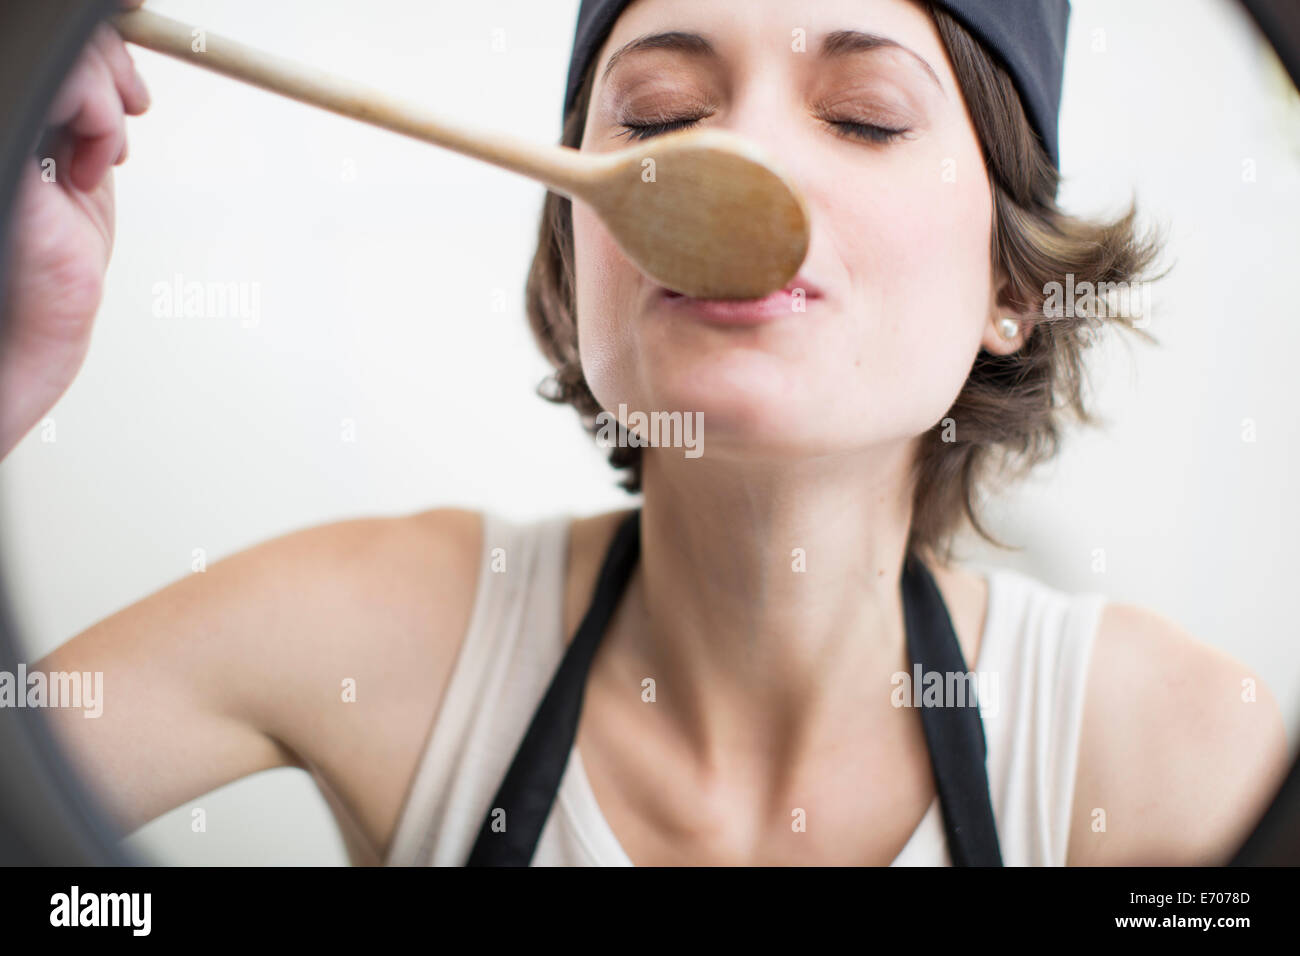 Female chef tasting food from saucepan in commercial kitchen Stock Photo